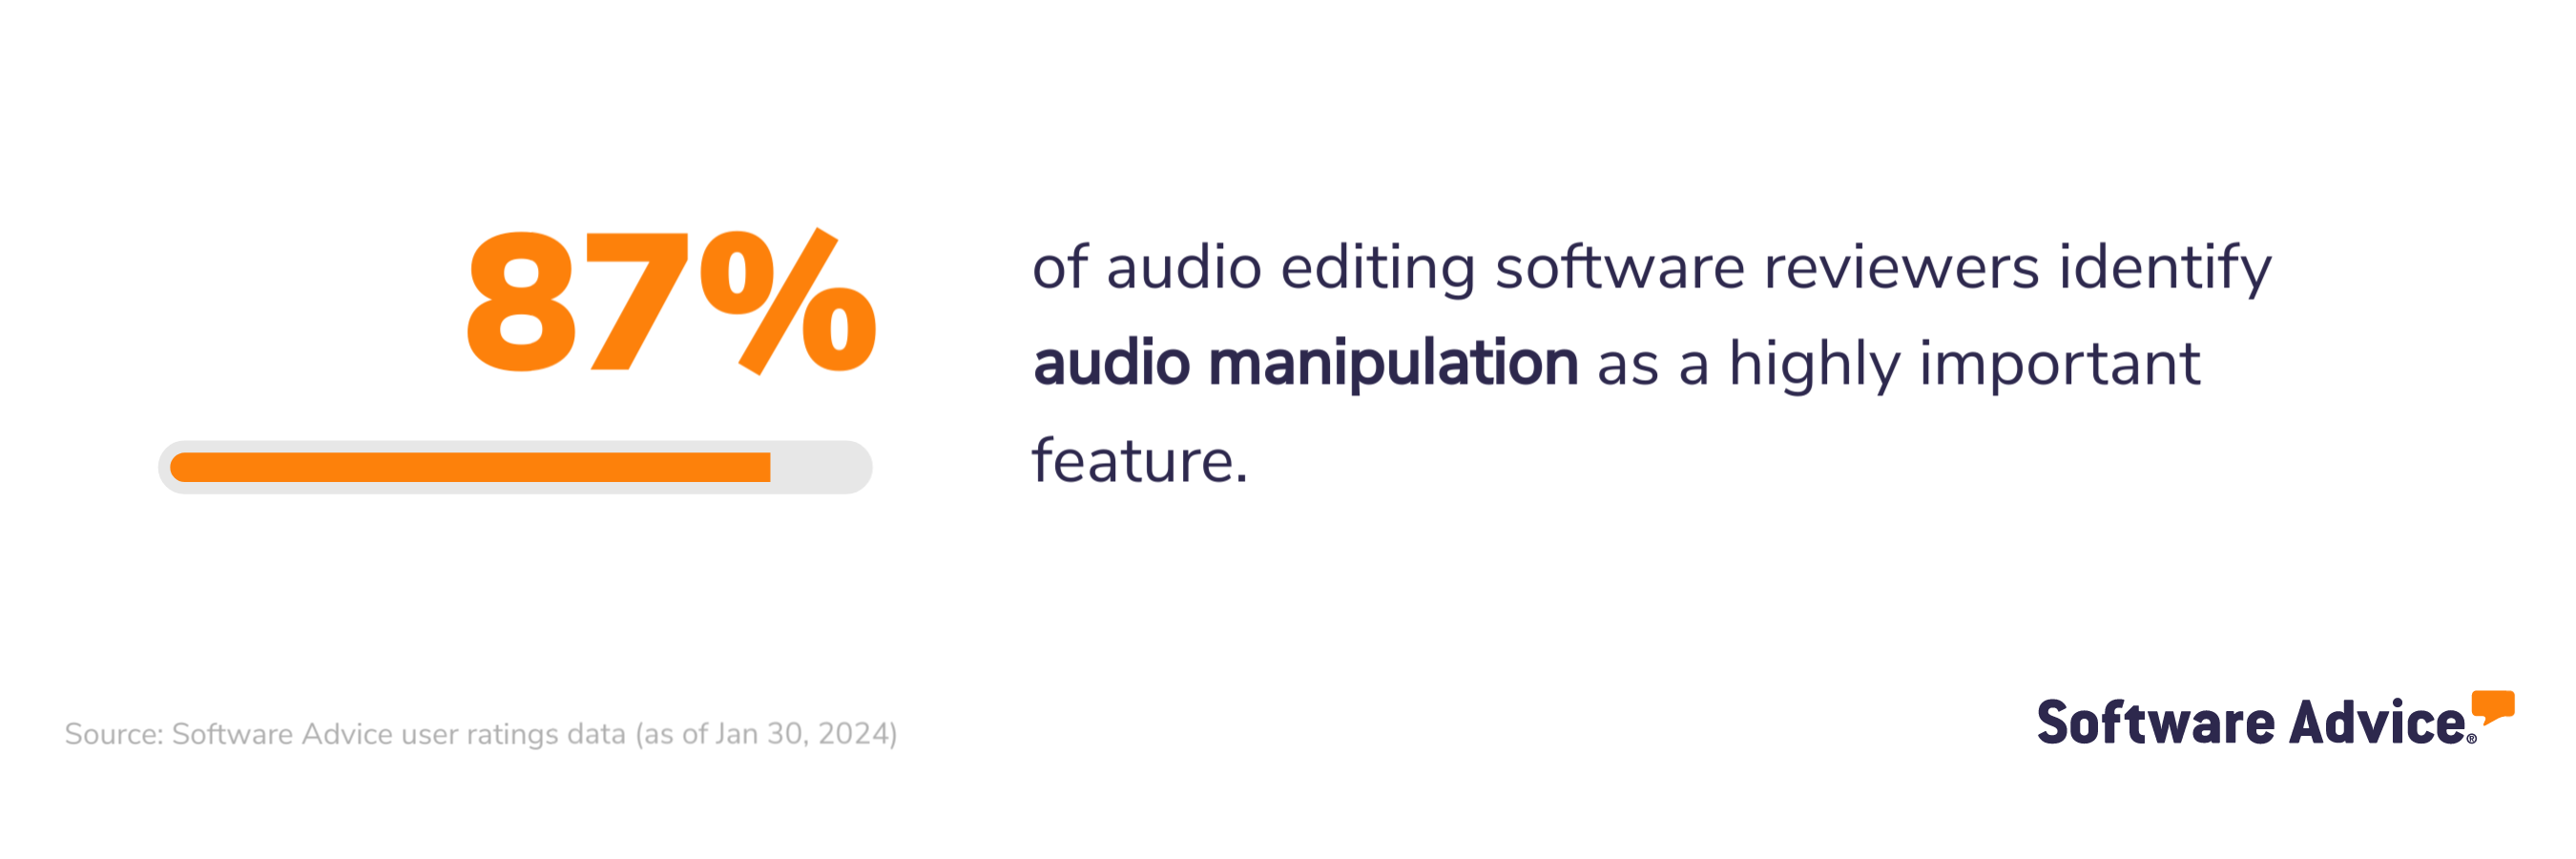 Software Advice graphic: 87% of audio editing software reviewers identify audio manipulation as a highly important feature